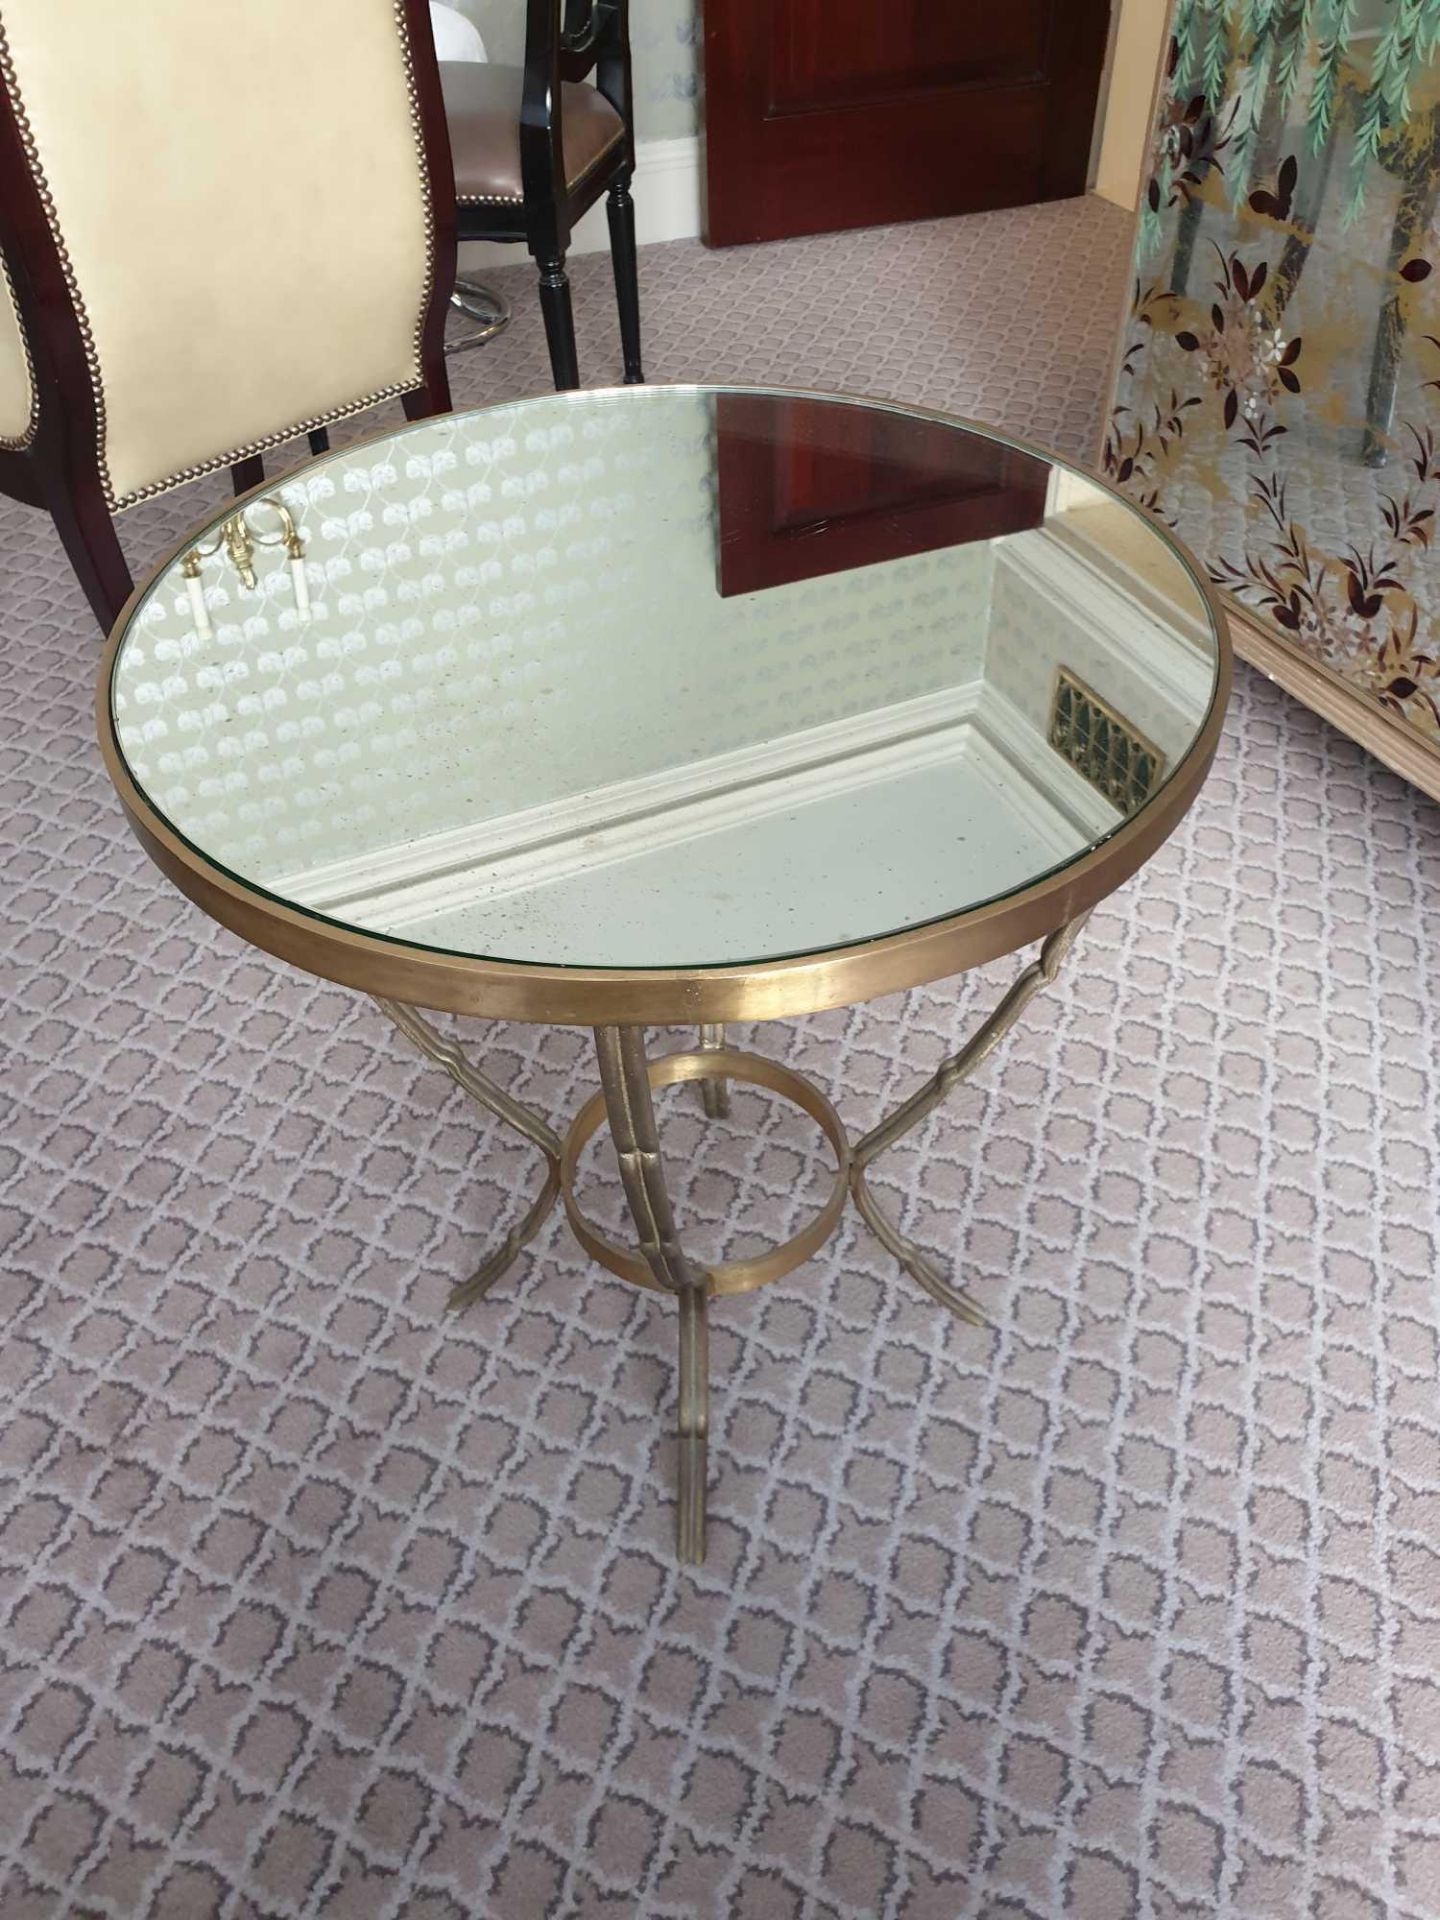 A Brass And Mirrored Top Coffee Table 60 x 76cm - Image 3 of 4